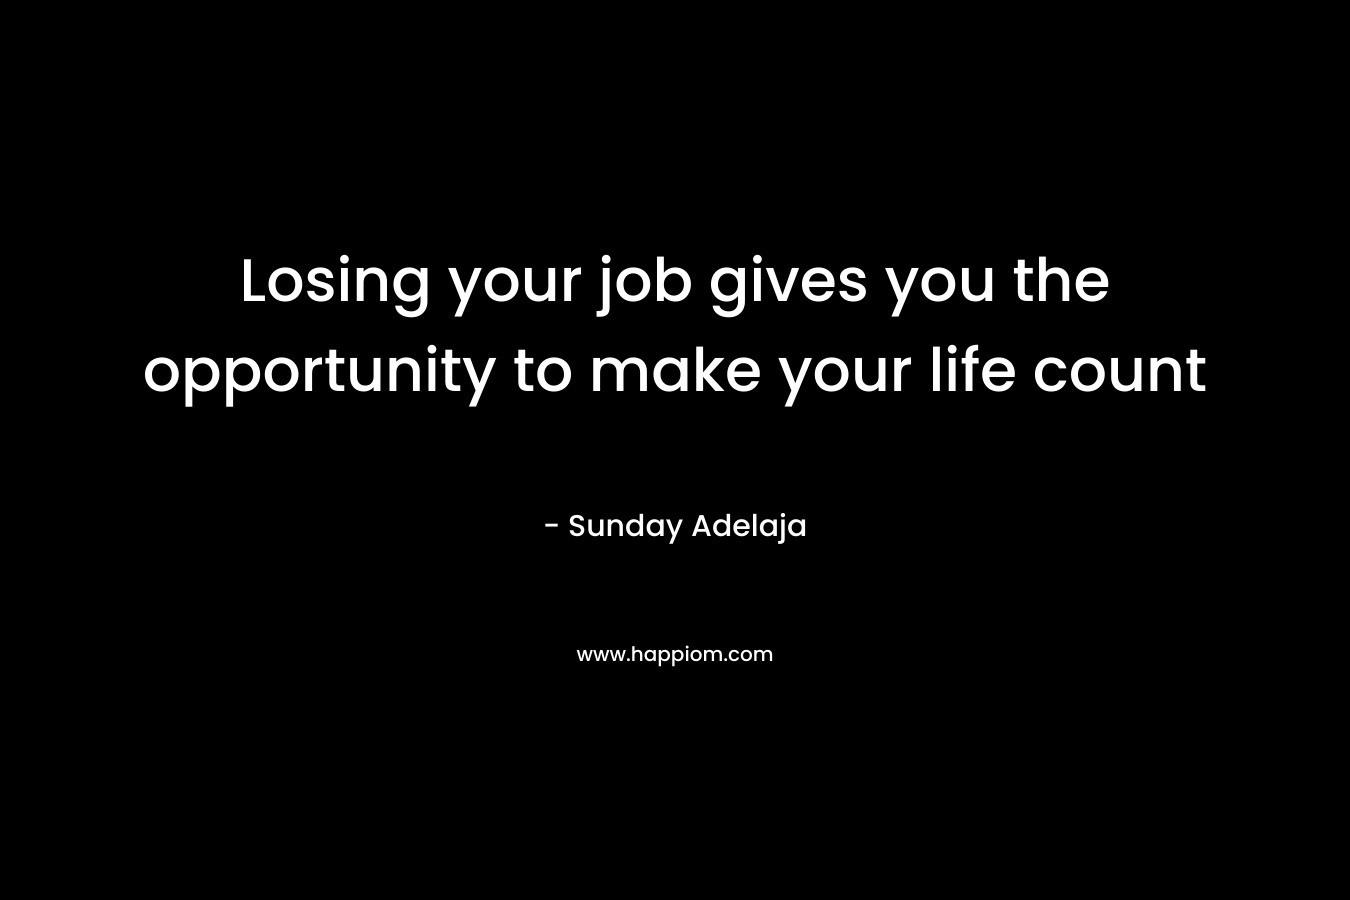 Losing your job gives you the opportunity to make your life count